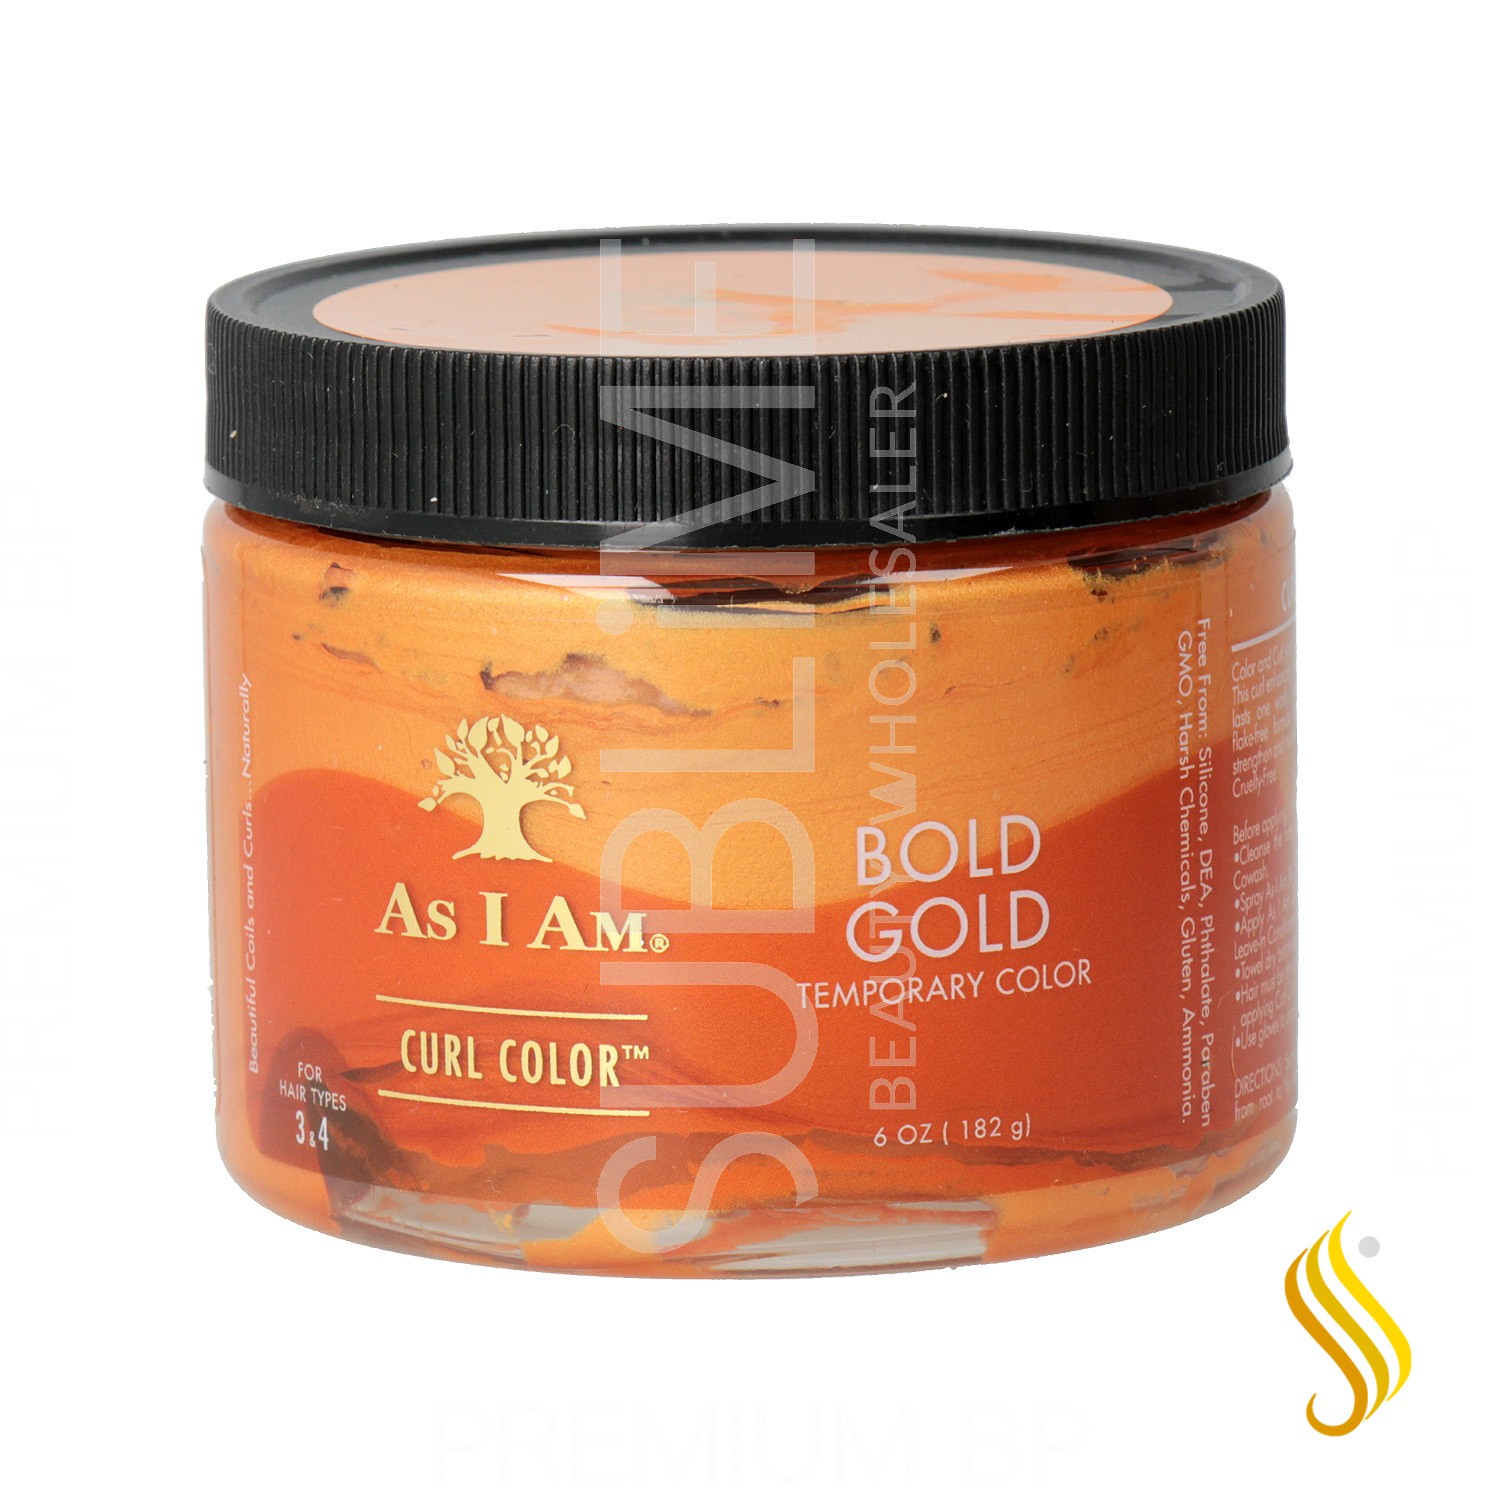 As I Am Curl Color Tinte Color Temporal Bold Gold 182 g